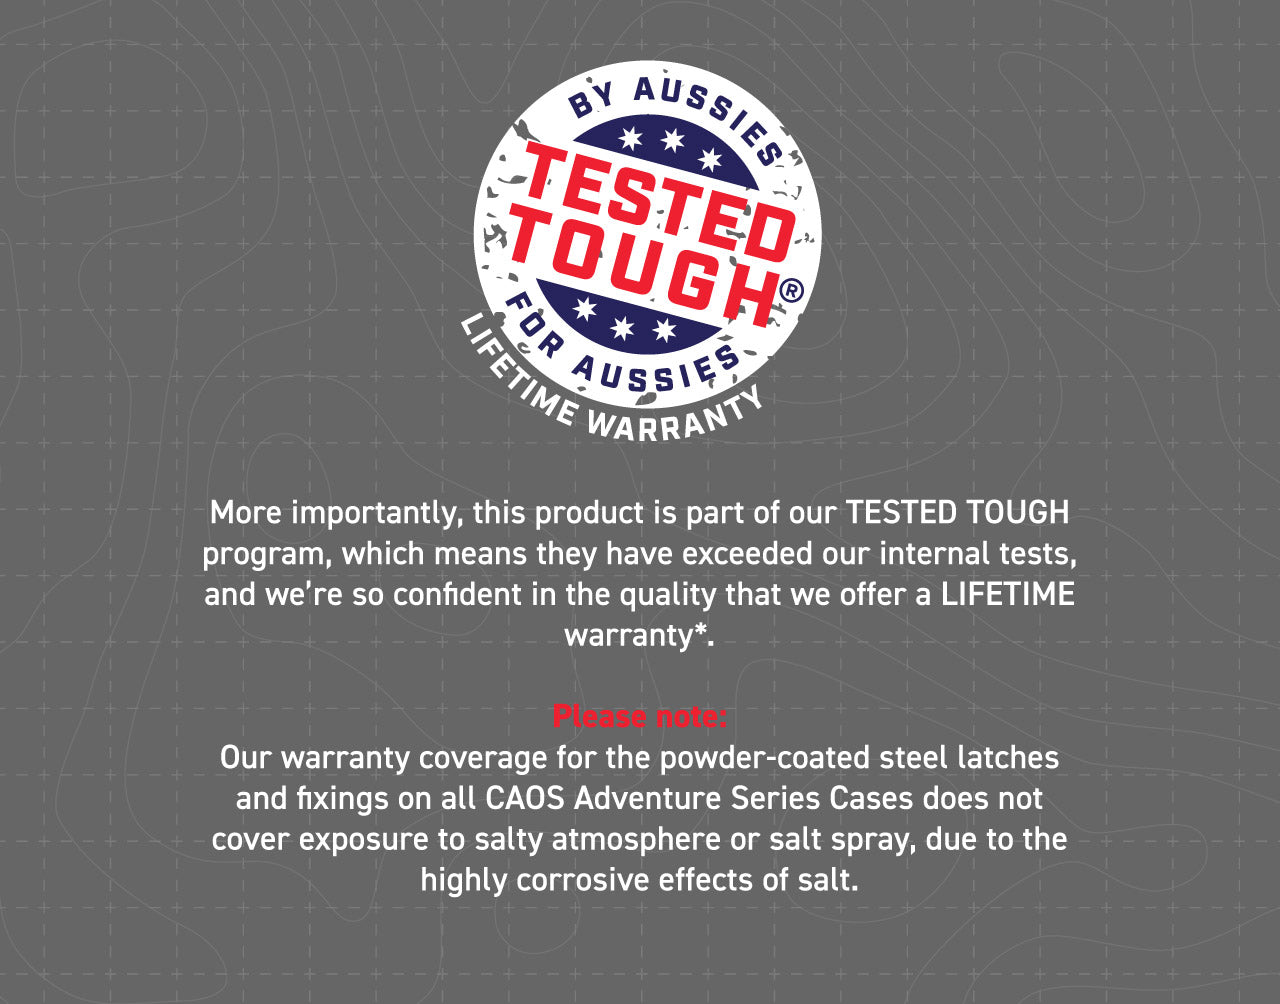 Tested Tough Warranty  More importantly, this product is part of our TESTED TOUGH program, which means they have exceeded our internal tests, and we’re so confident in the quality that we offer a LIFETIME warranty*. 